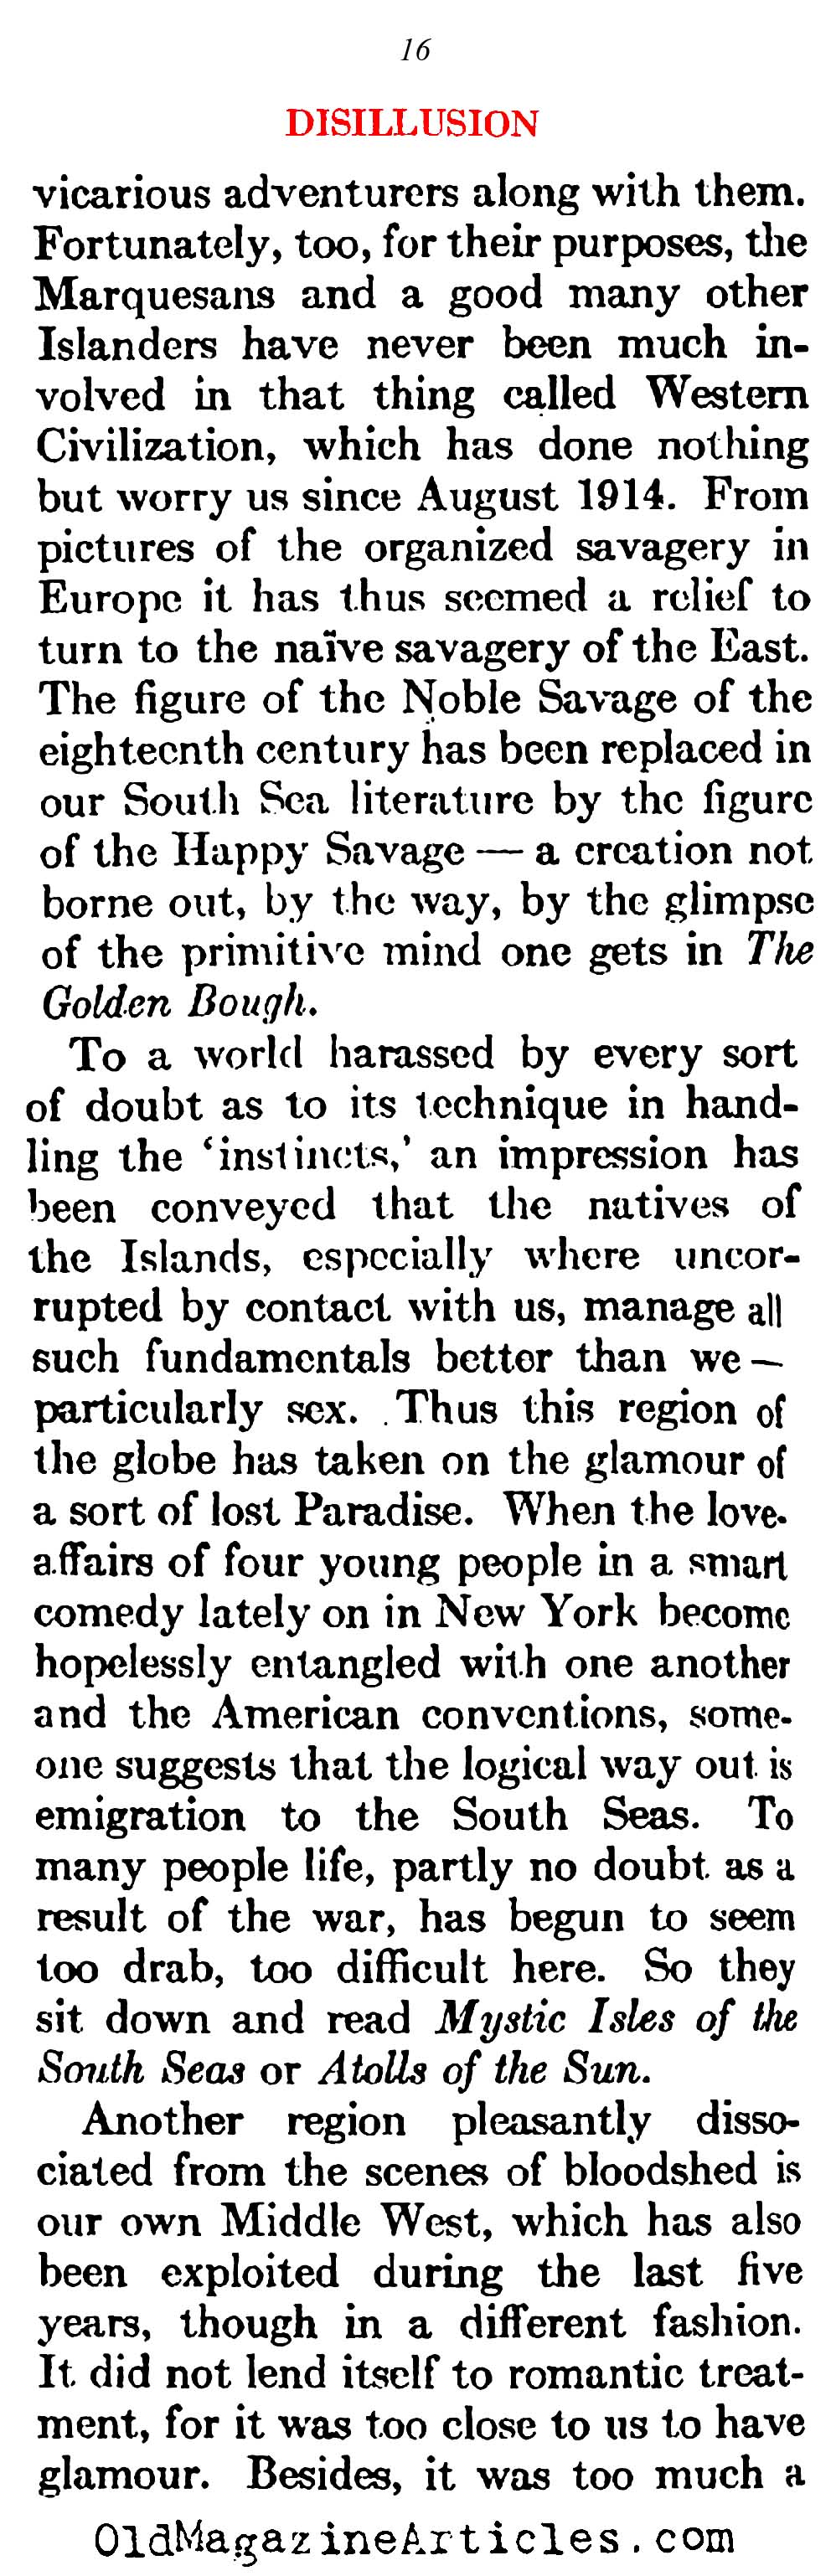 The Pessimism That Followed W.W. I   (Atlantic Monthly, 1923)